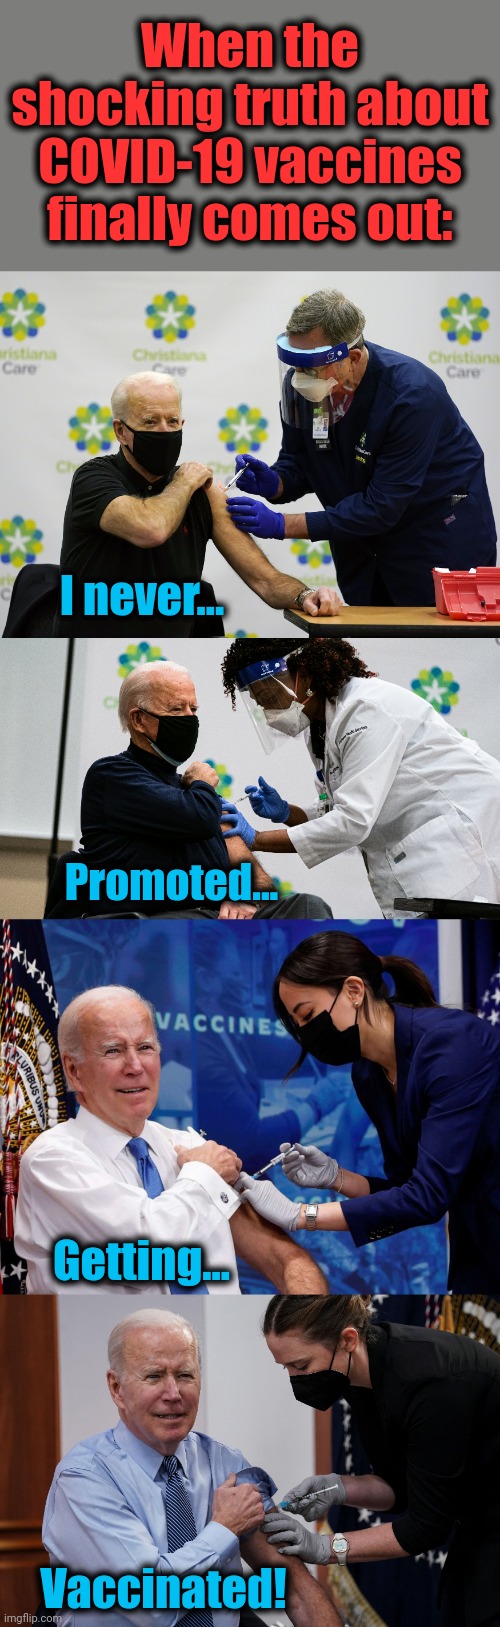 More lies to come | When the shocking truth about COVID-19 vaccines finally comes out:; I never... Promoted... Getting... Vaccinated! | image tagged in memes,joe biden,covid-19,coronavirus,vaccines,lies | made w/ Imgflip meme maker